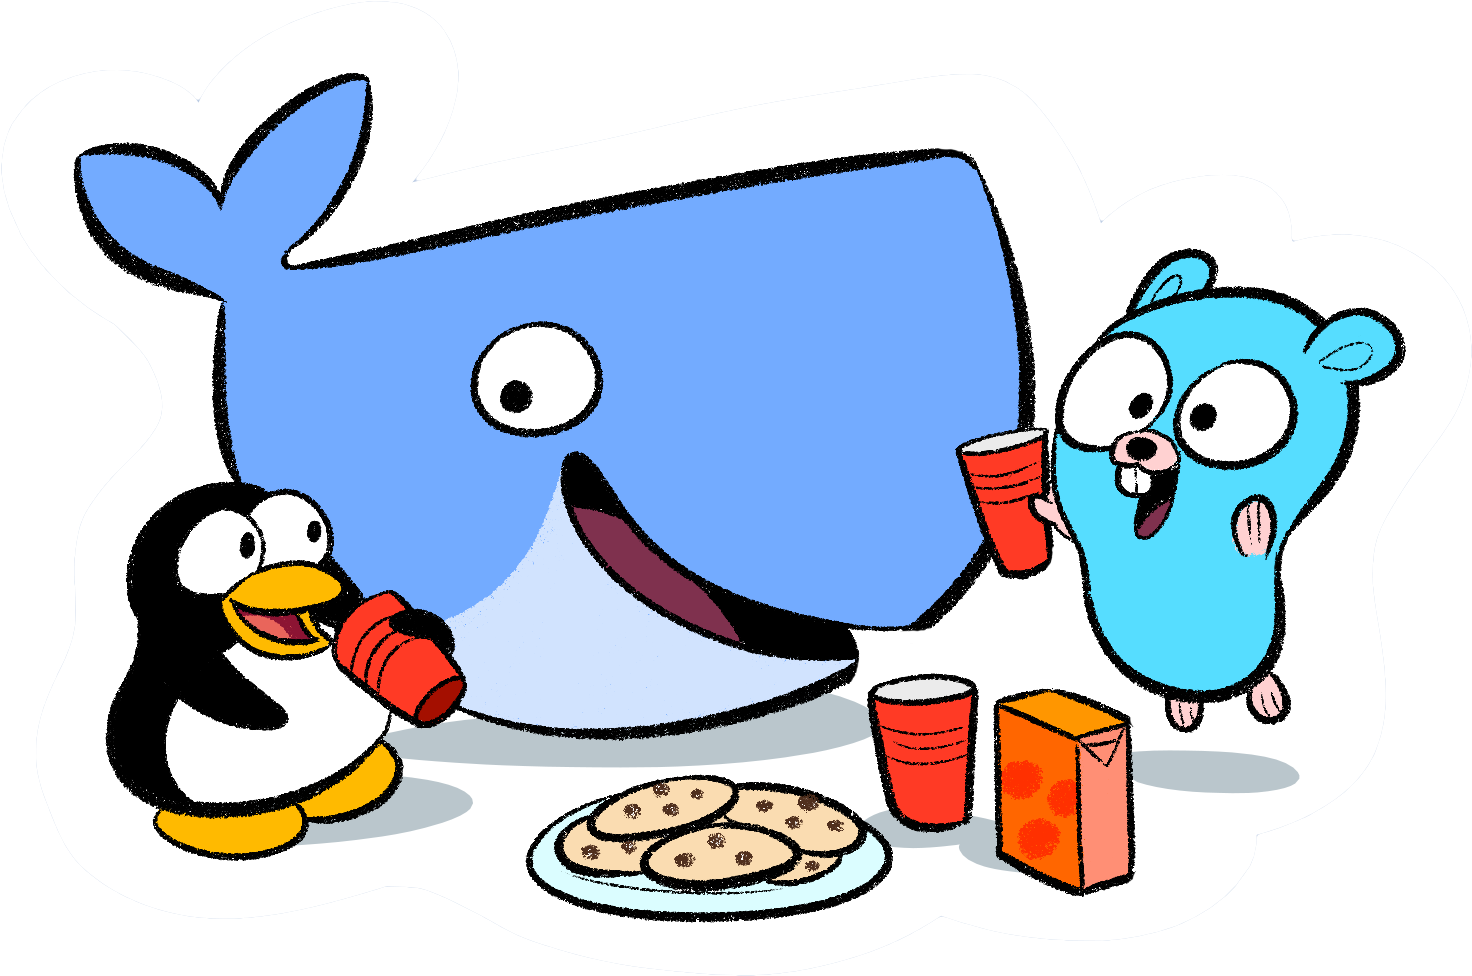 Microsoft Clipart To Be Or Not To Be - Docker Go Linux (1541x1081)